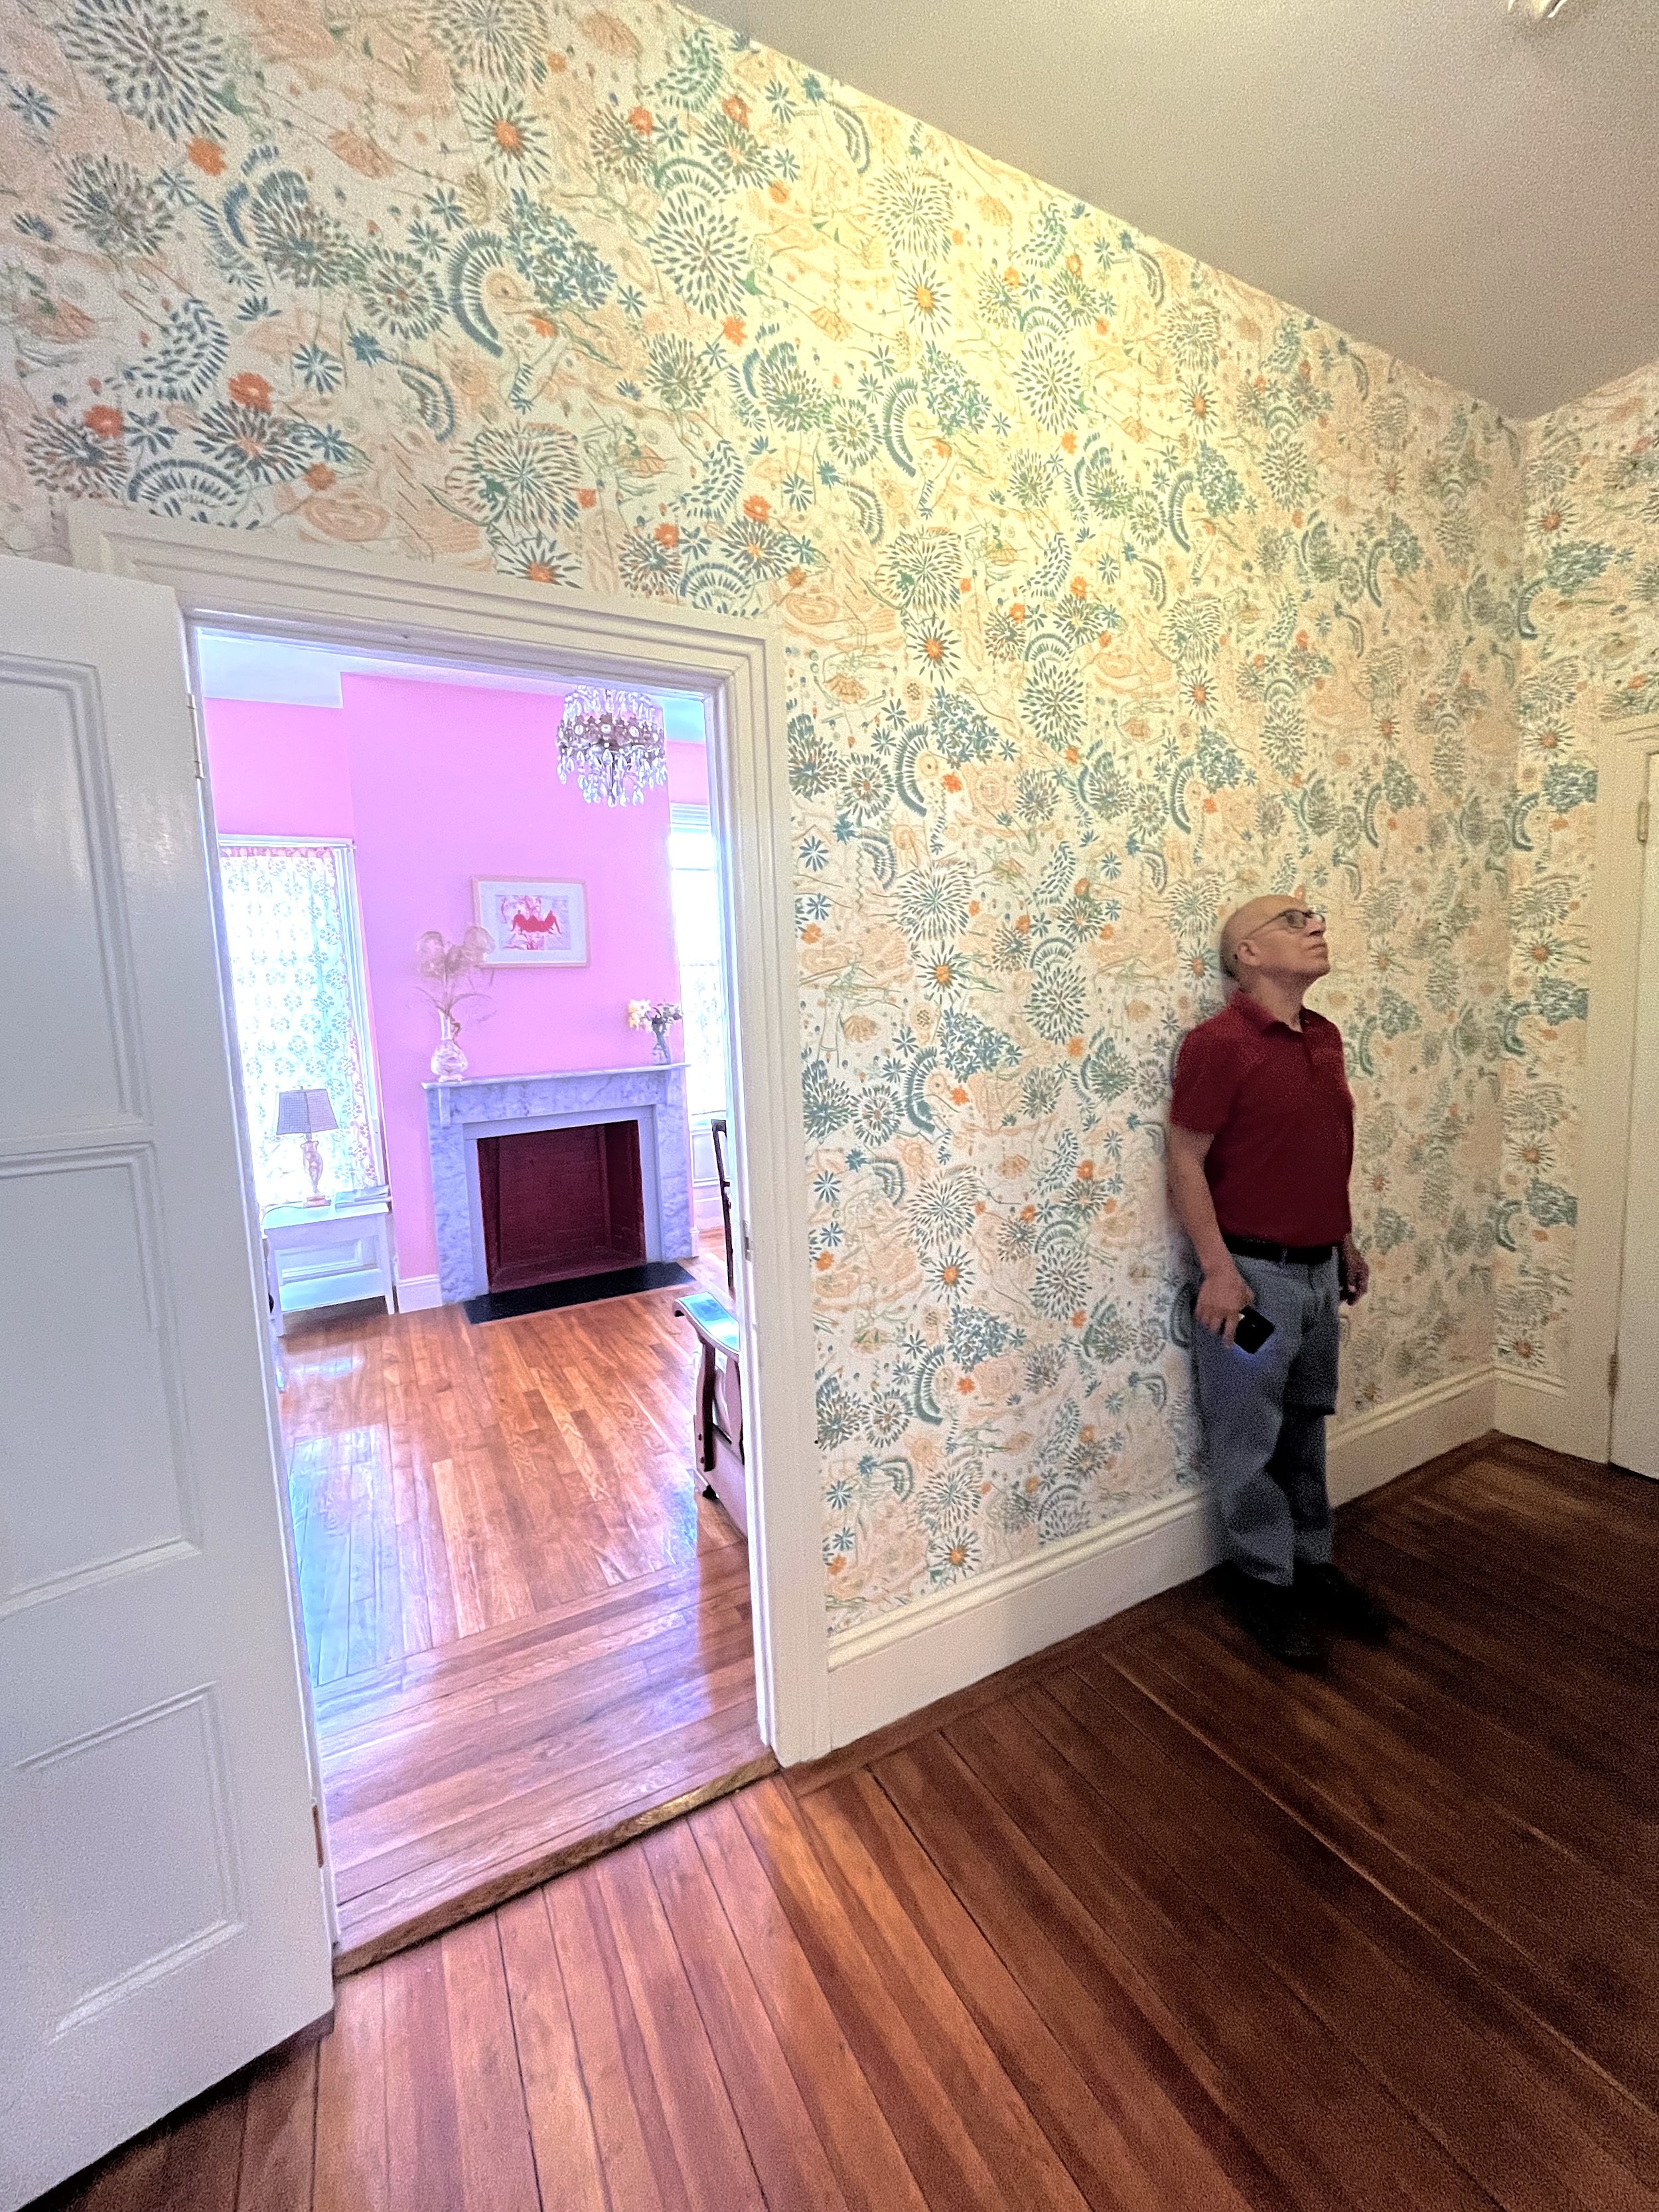  Wallpaper designed, screen-printed, and installed by the artist. 